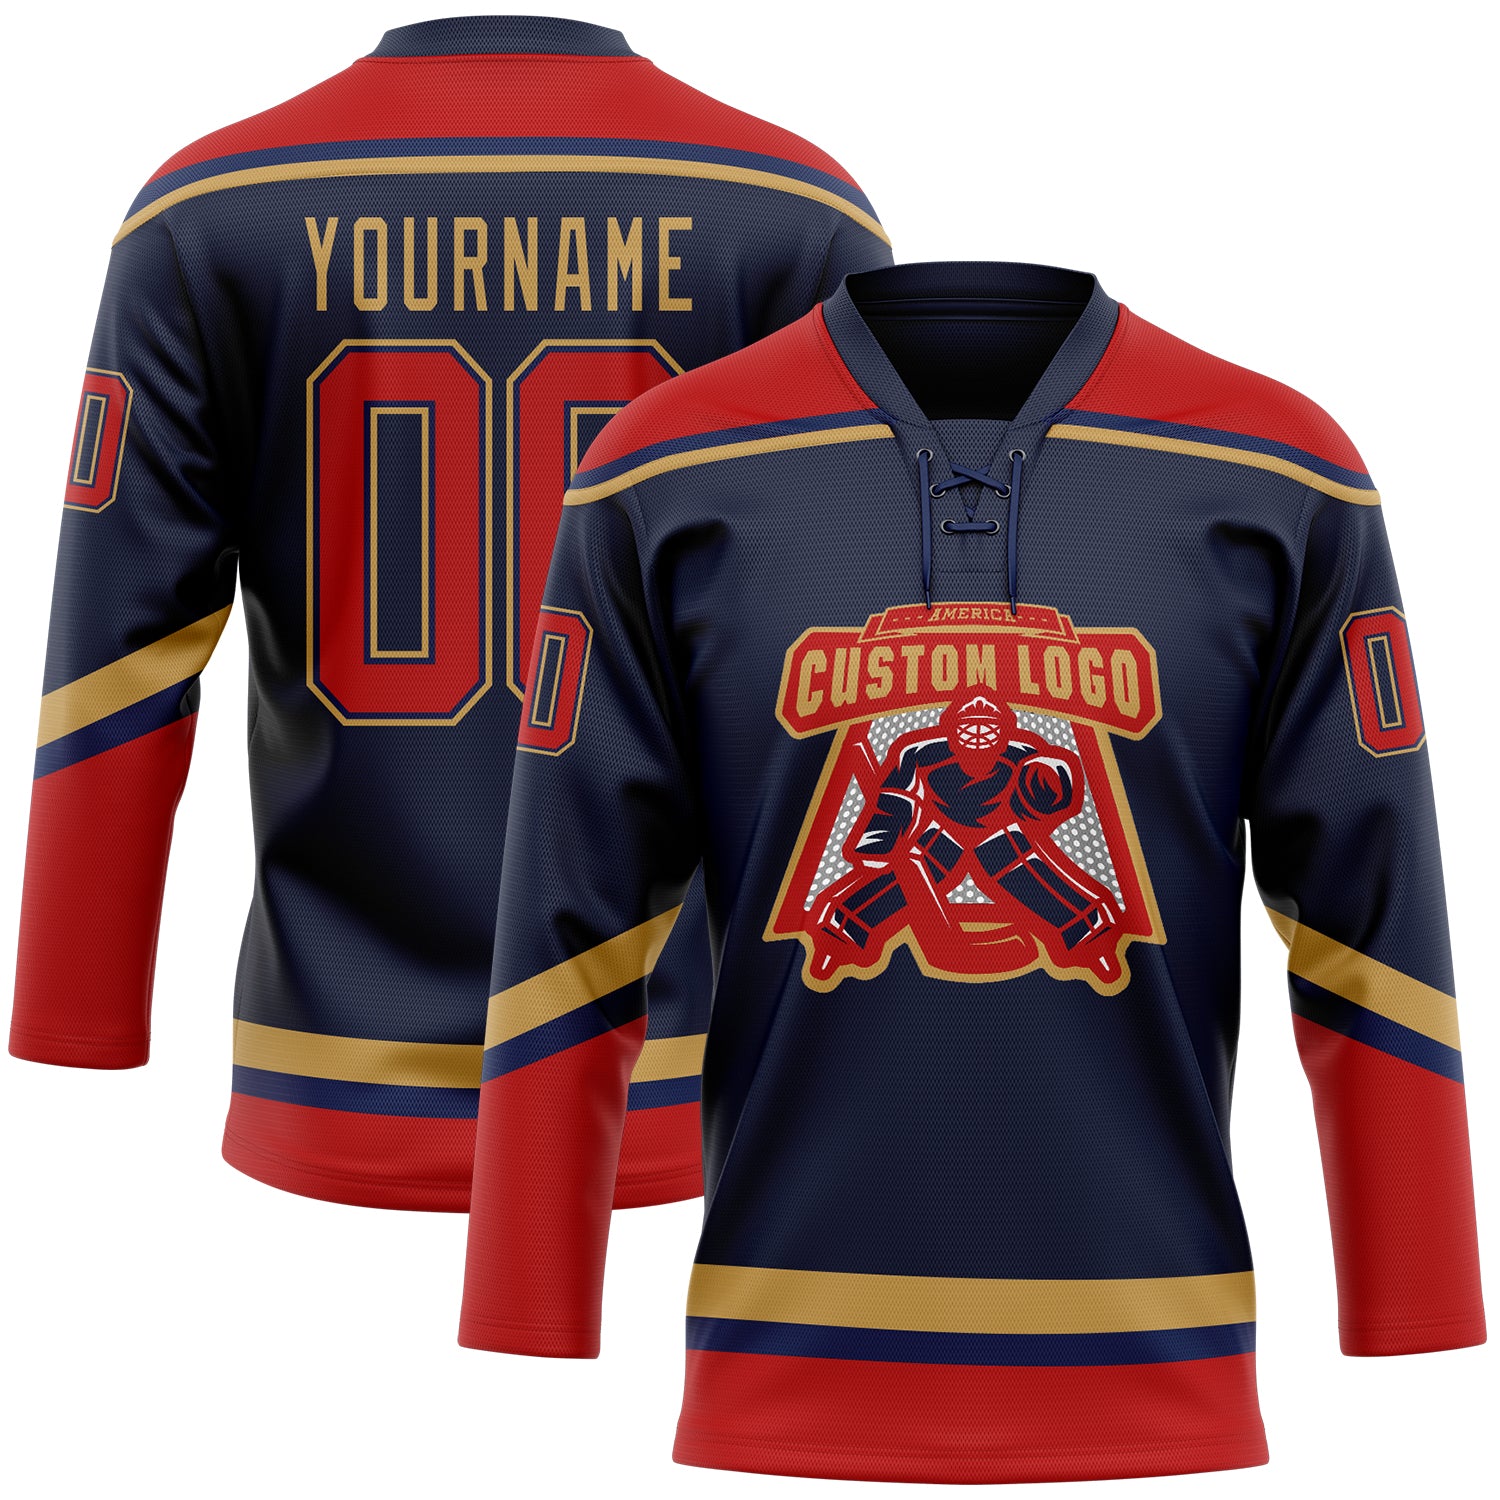 Florida Panthers Reverse Retro Jerseys with Personalized